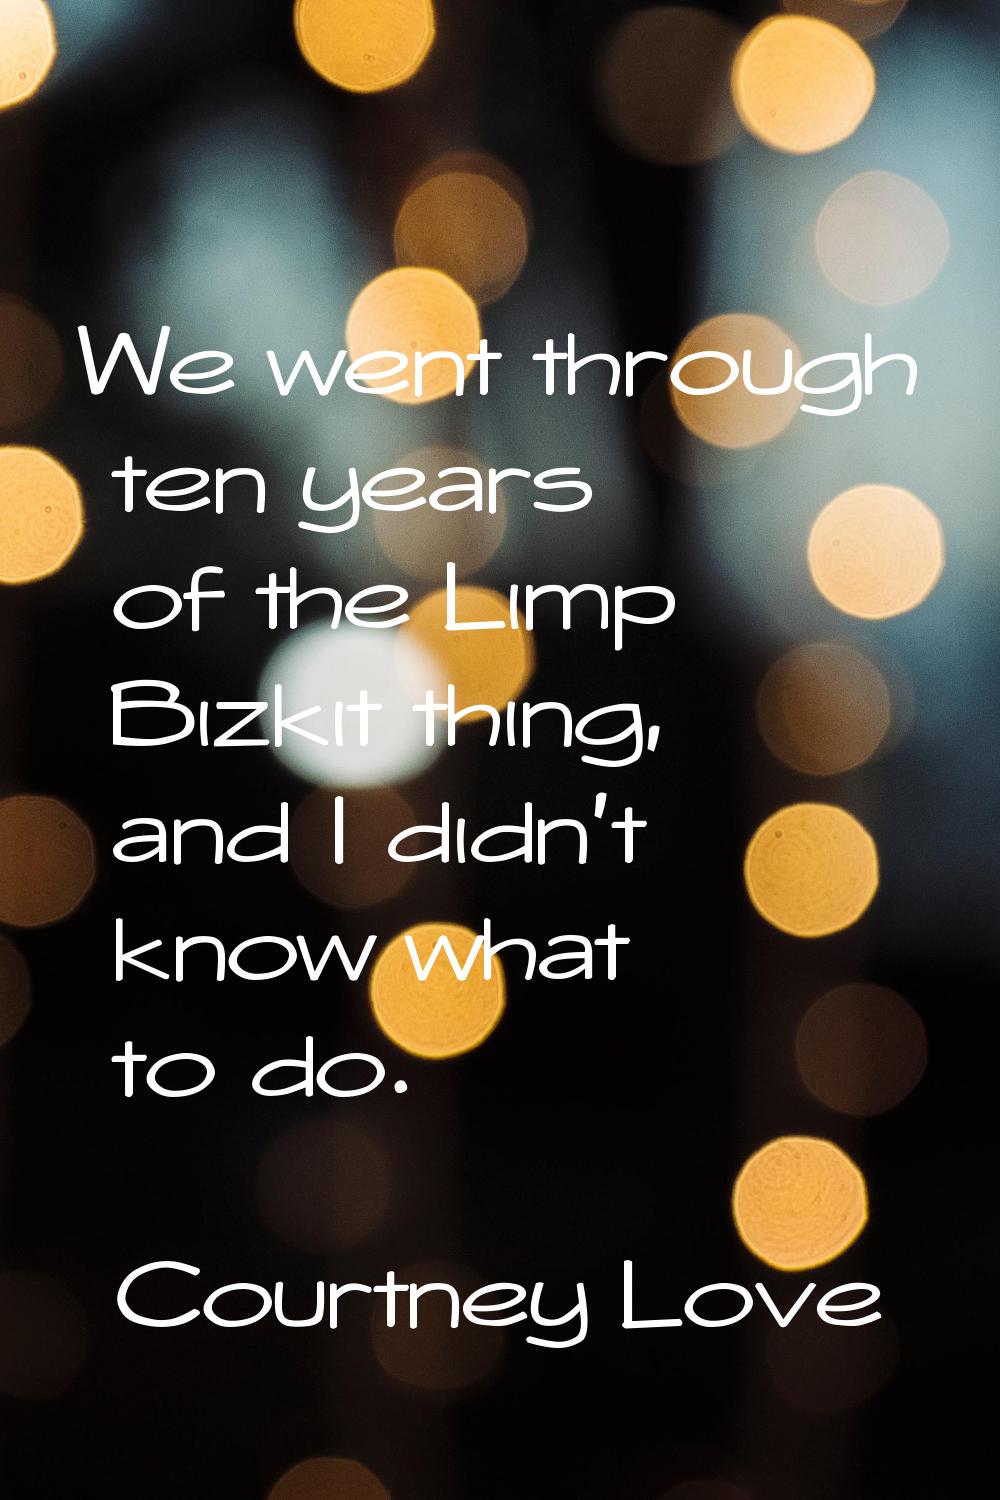 We went through ten years of the Limp Bizkit thing, and I didn't know what to do.